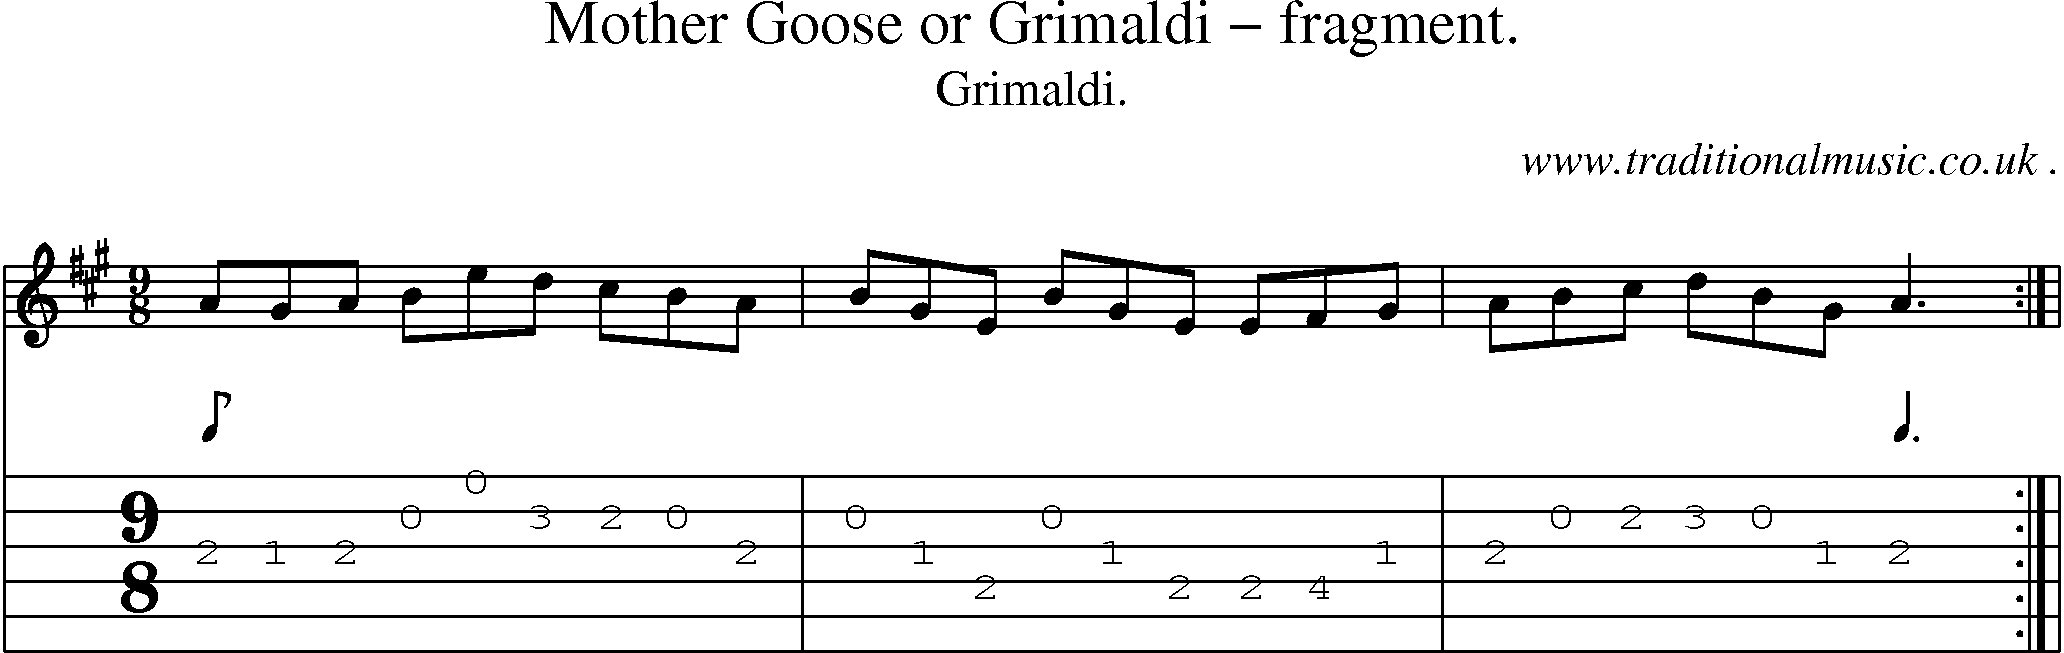 Sheet-Music and Guitar Tabs for Mother Goose Or Grimaldi Fragment